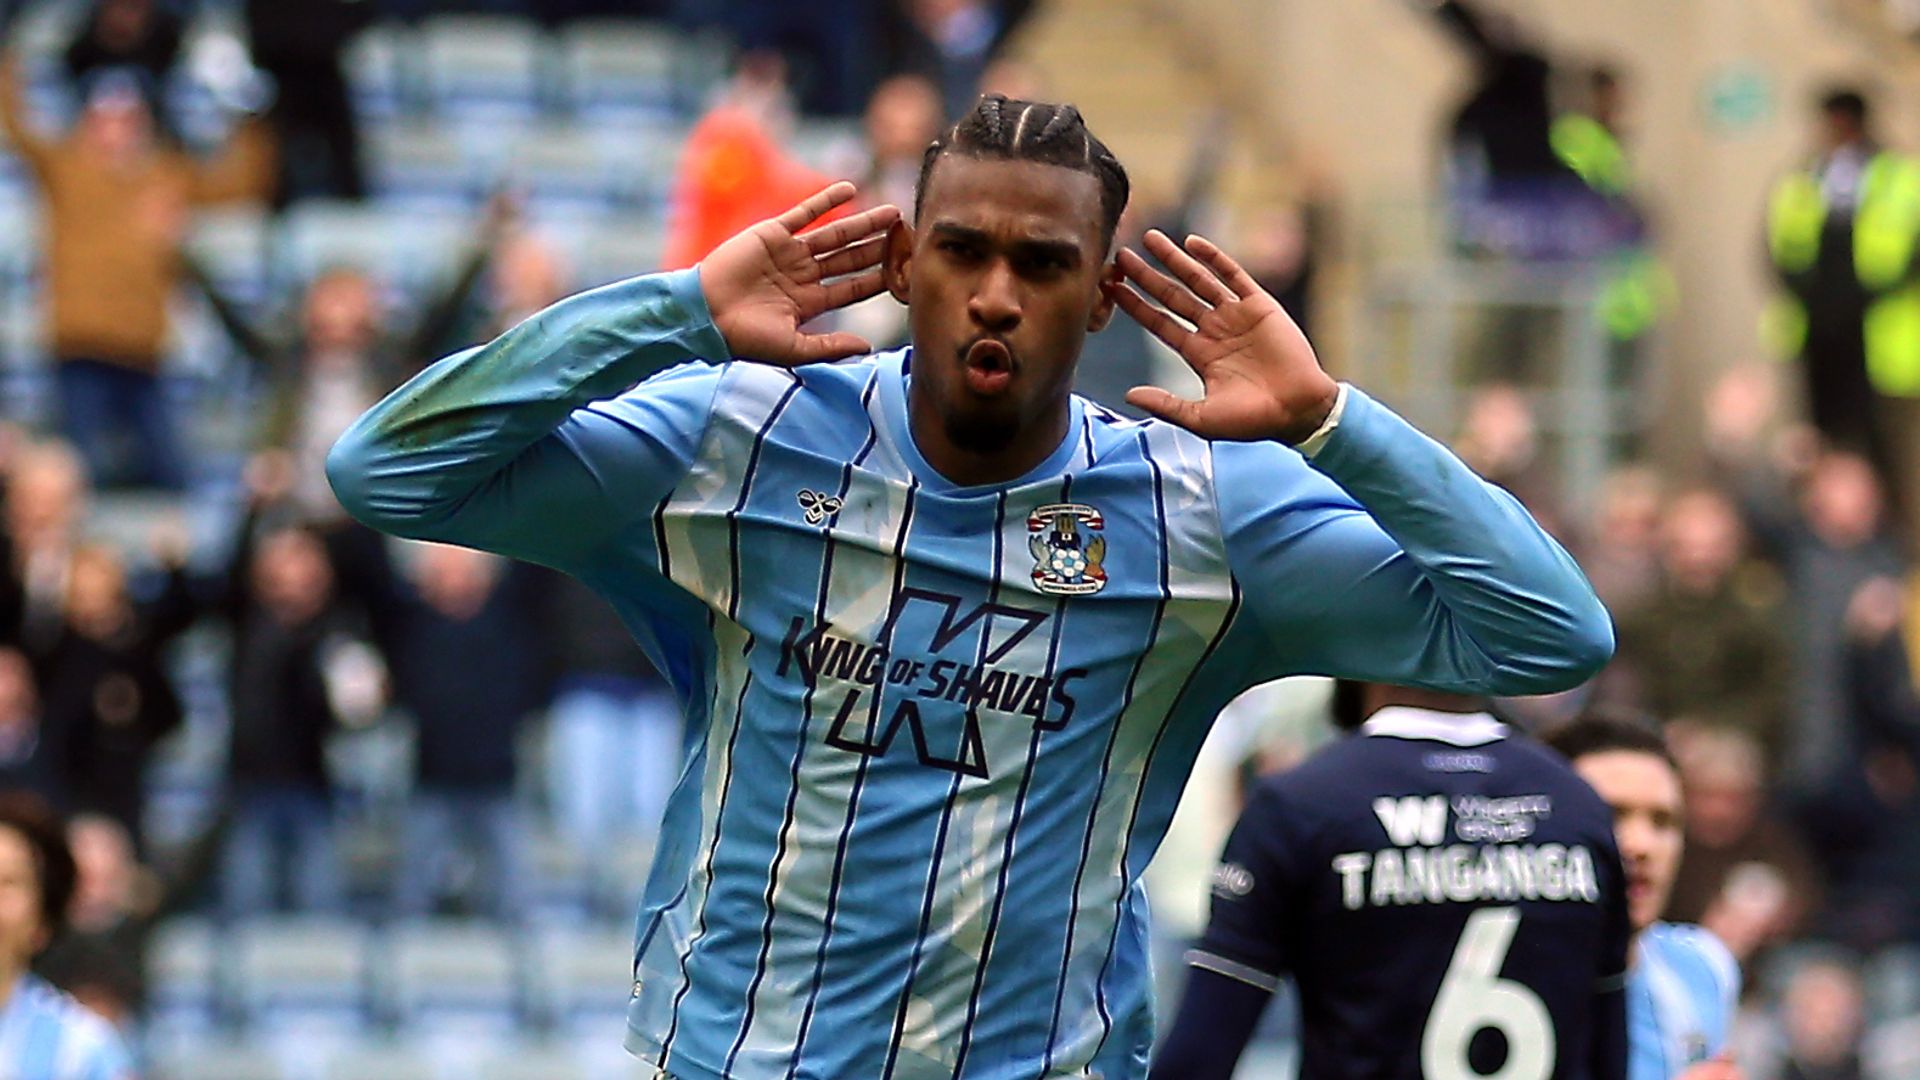 Coventry comeback stuns Millwall as Wright scores twice